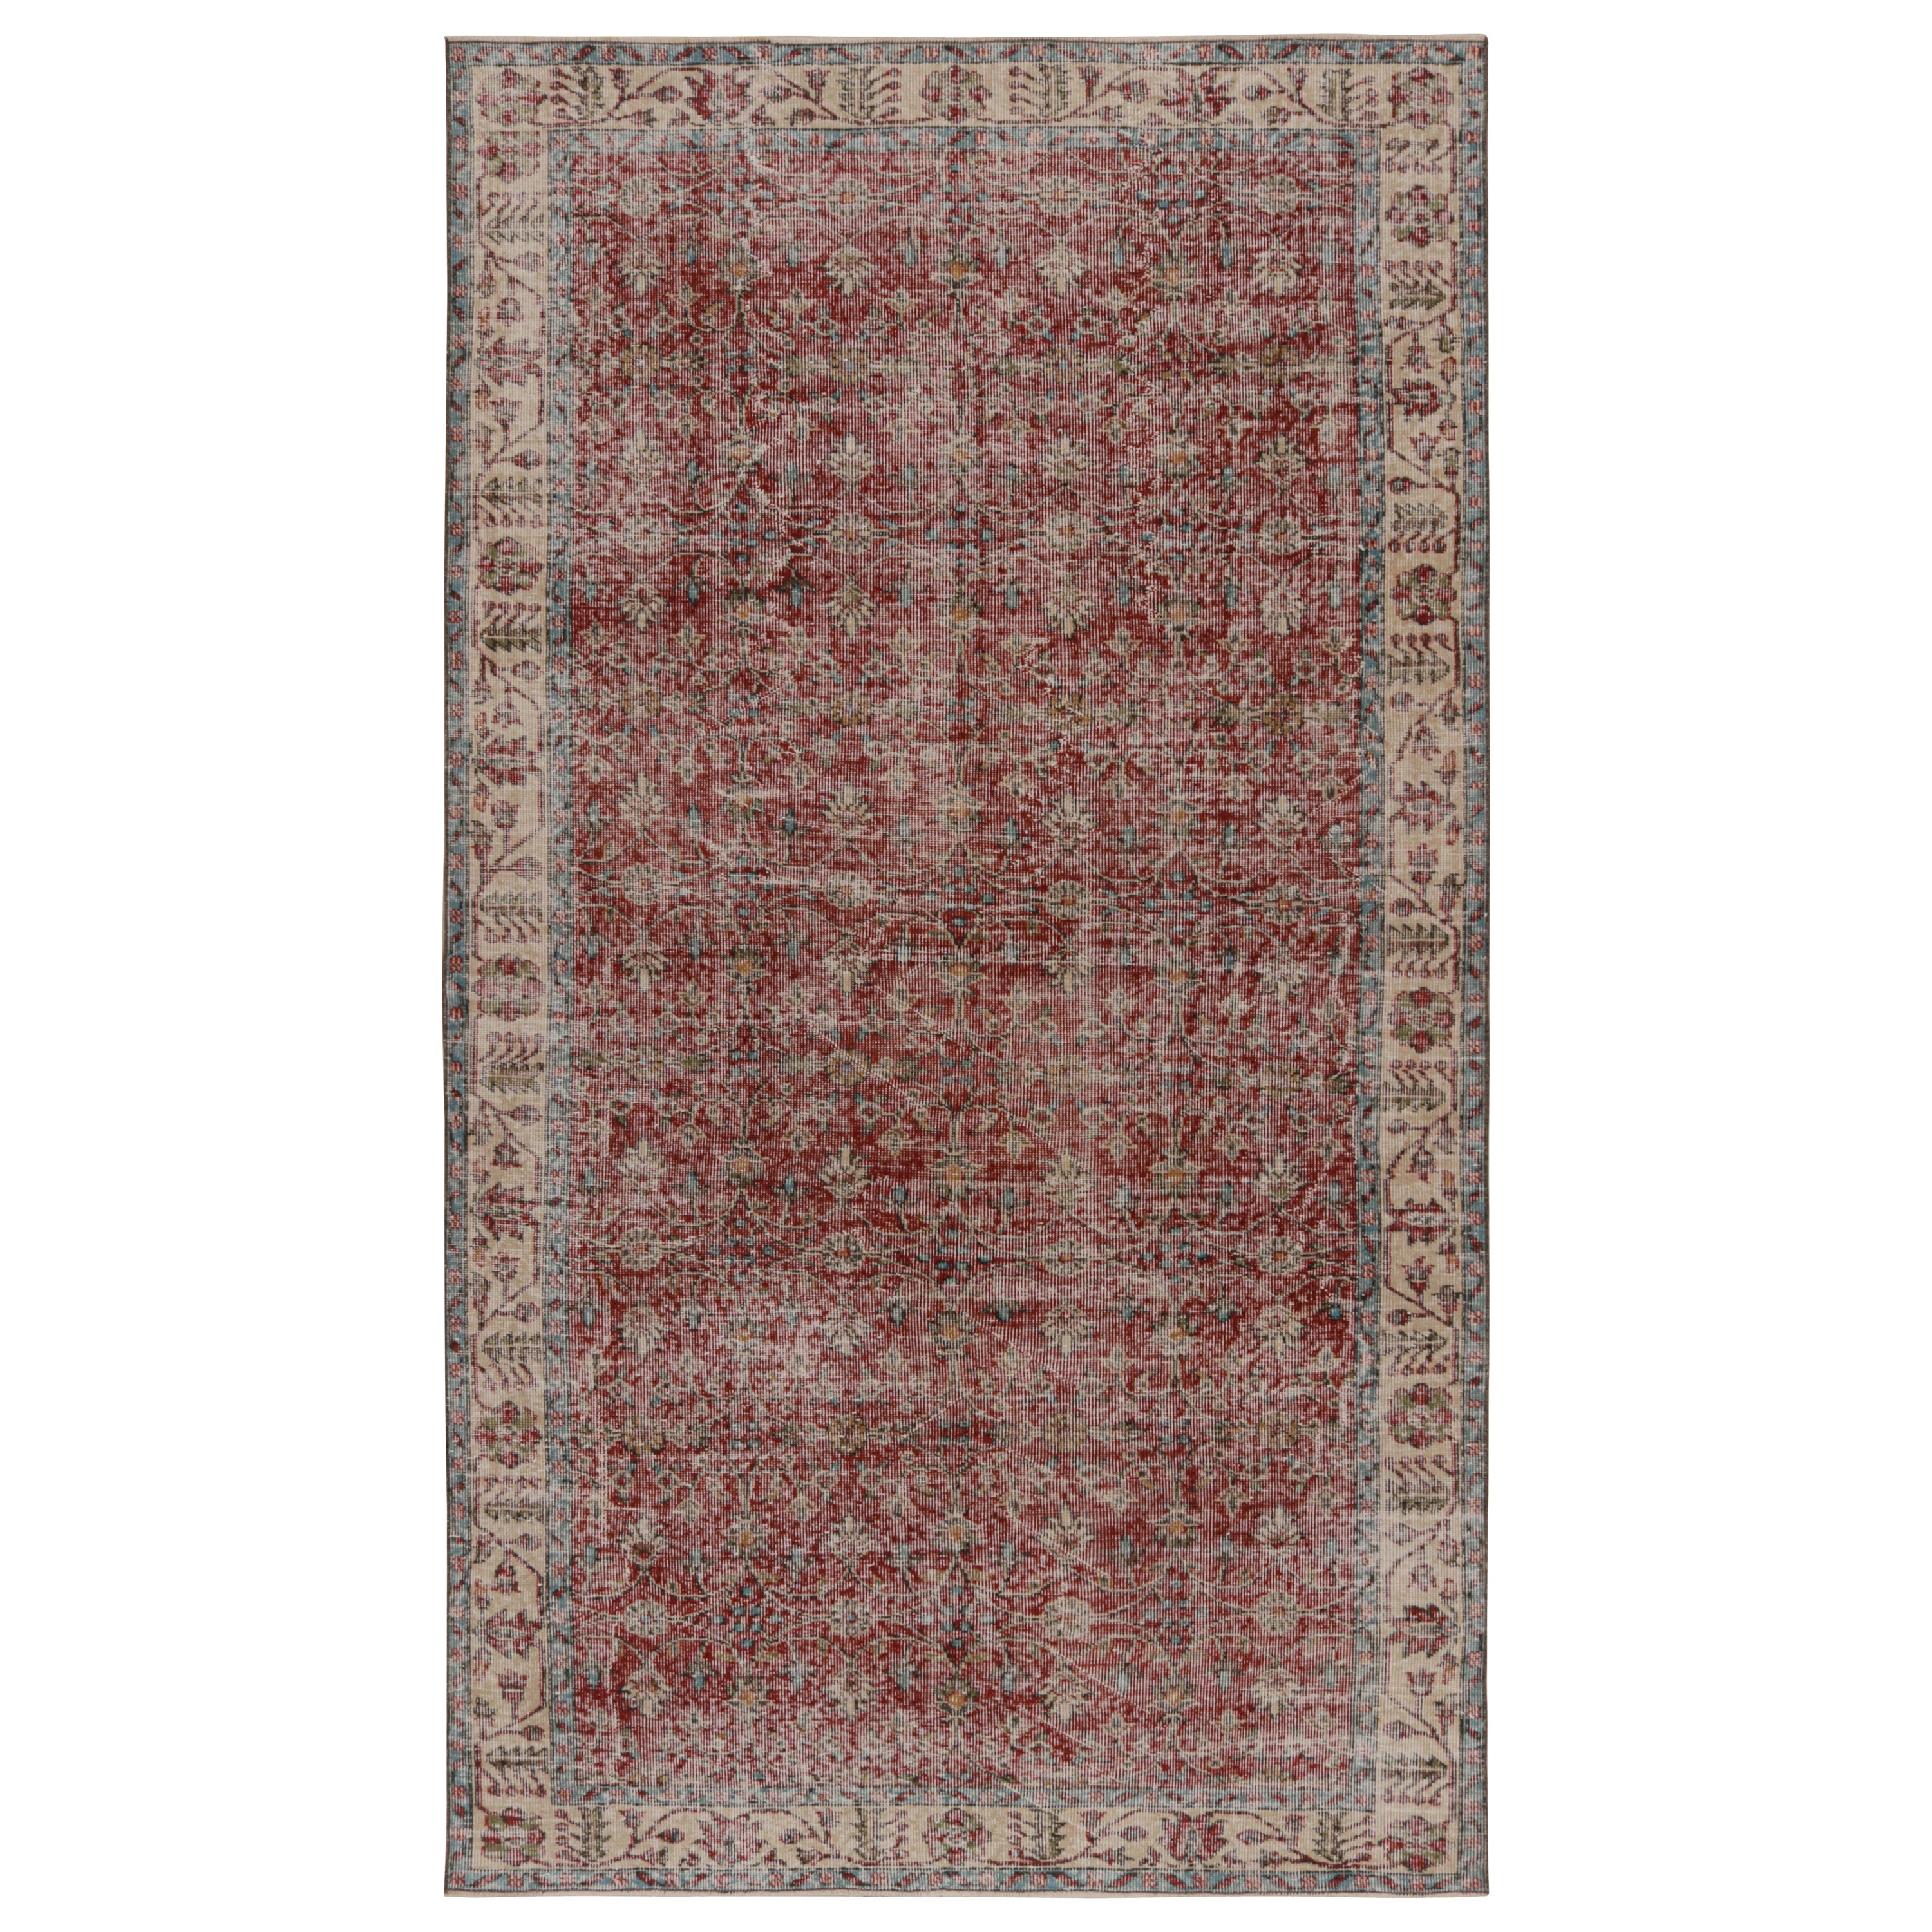 Vintage Turkish Rug in Red with Floral Patterns, from Rug & Kilim For Sale